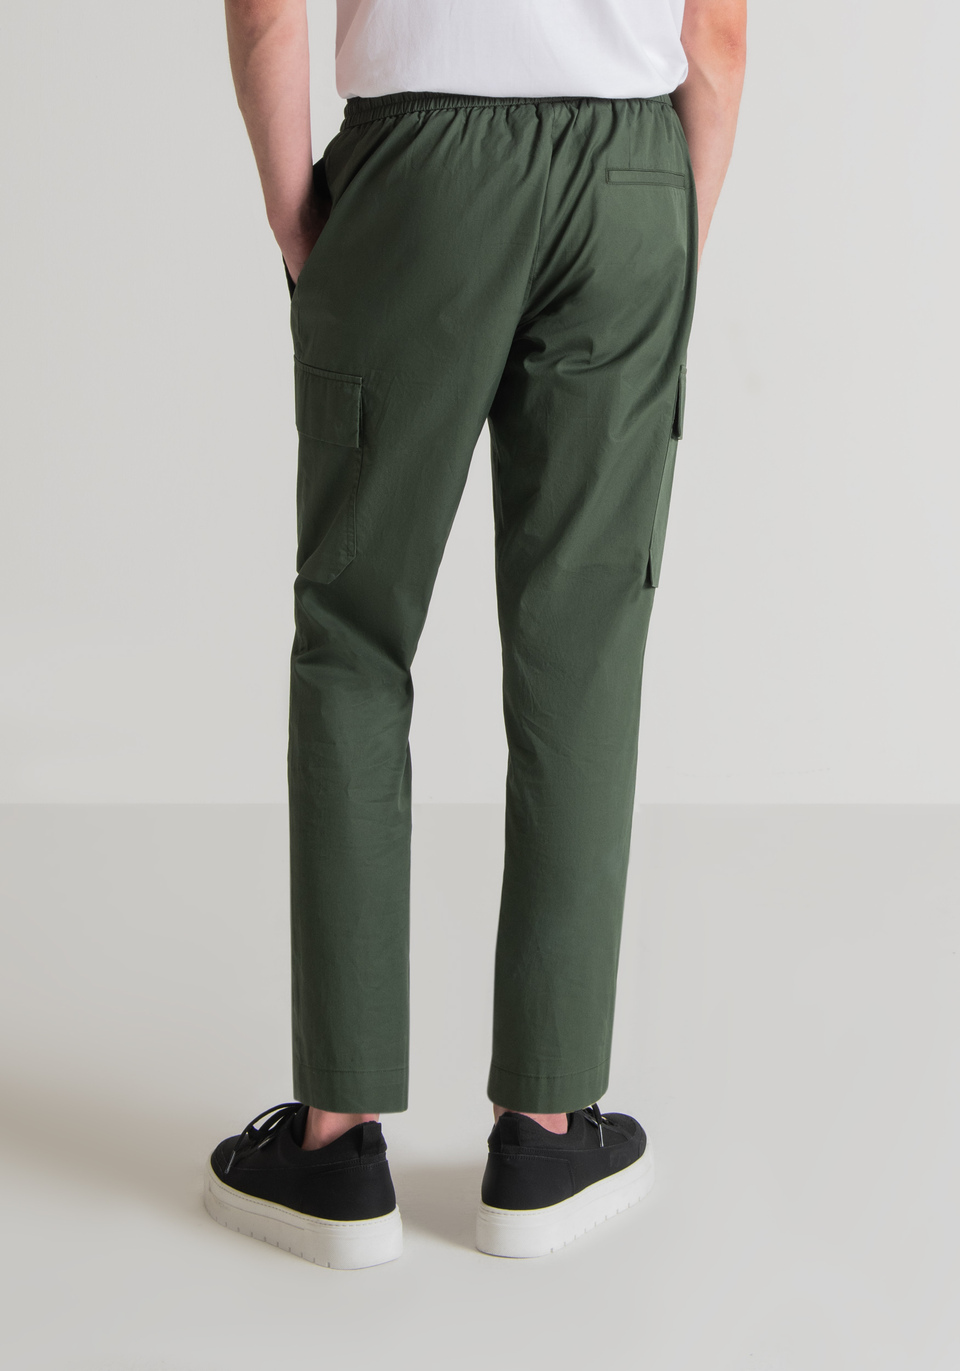 Buy WES Formals by Westside WES Formals Black Carrot Fit Trousers at Redfynd